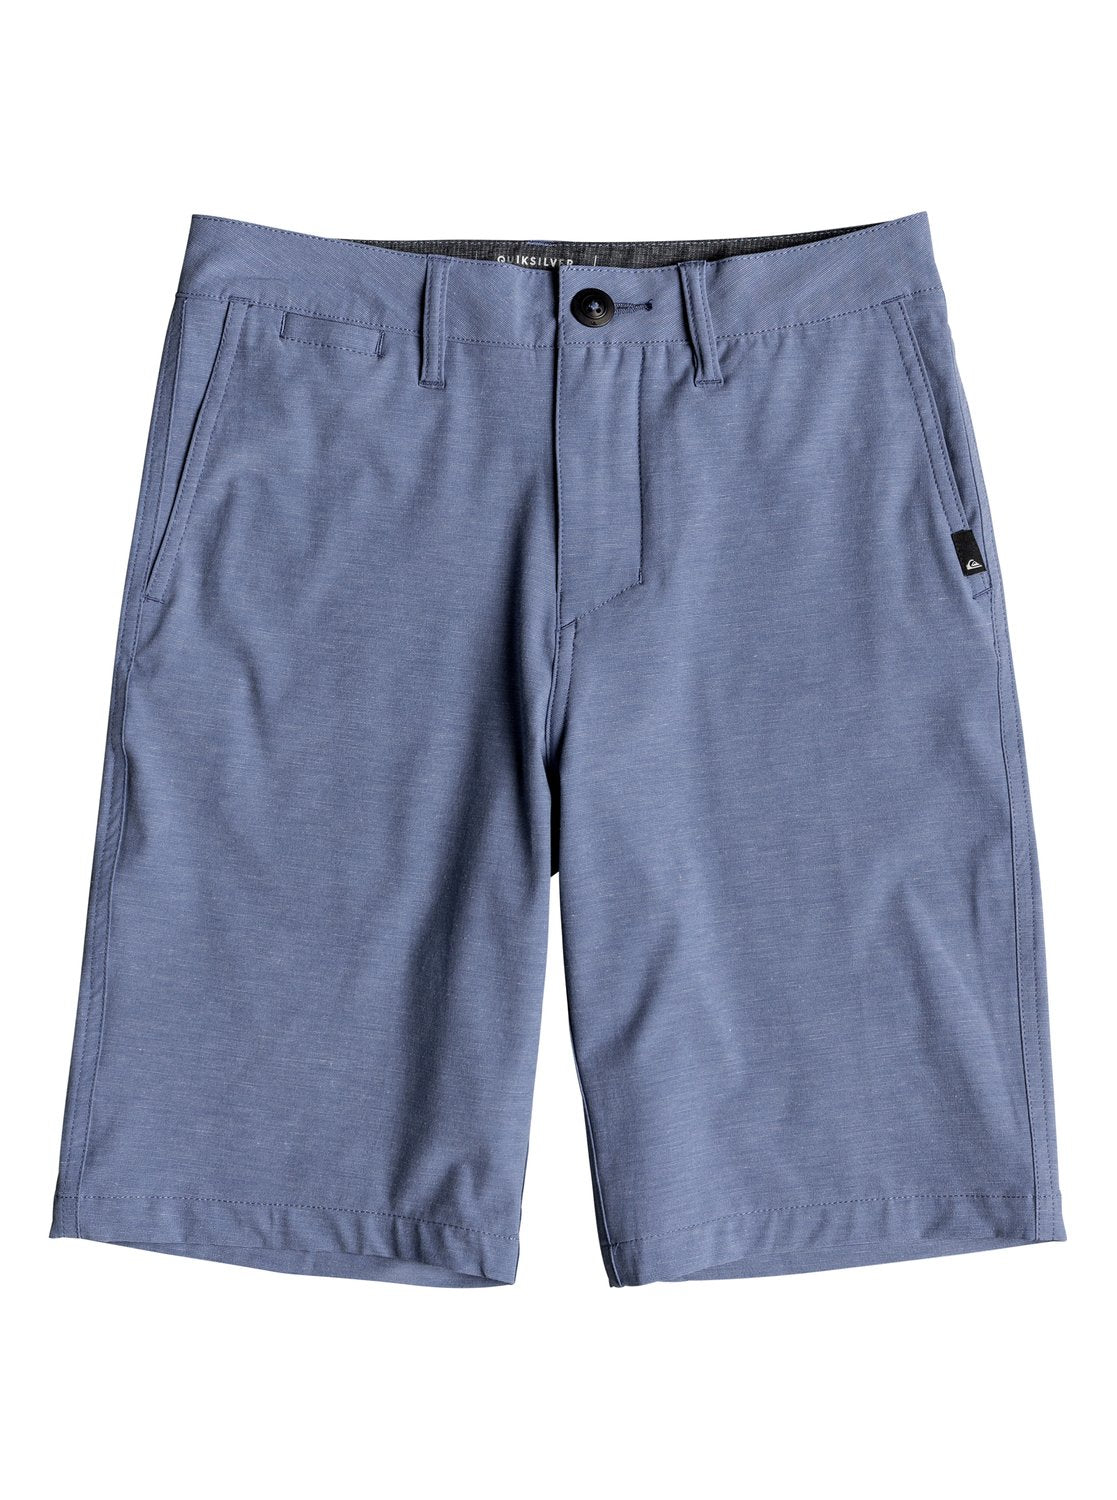 Quiksilver Union Heather 19in Youth Amphibian Shorts BNG0 22/8S